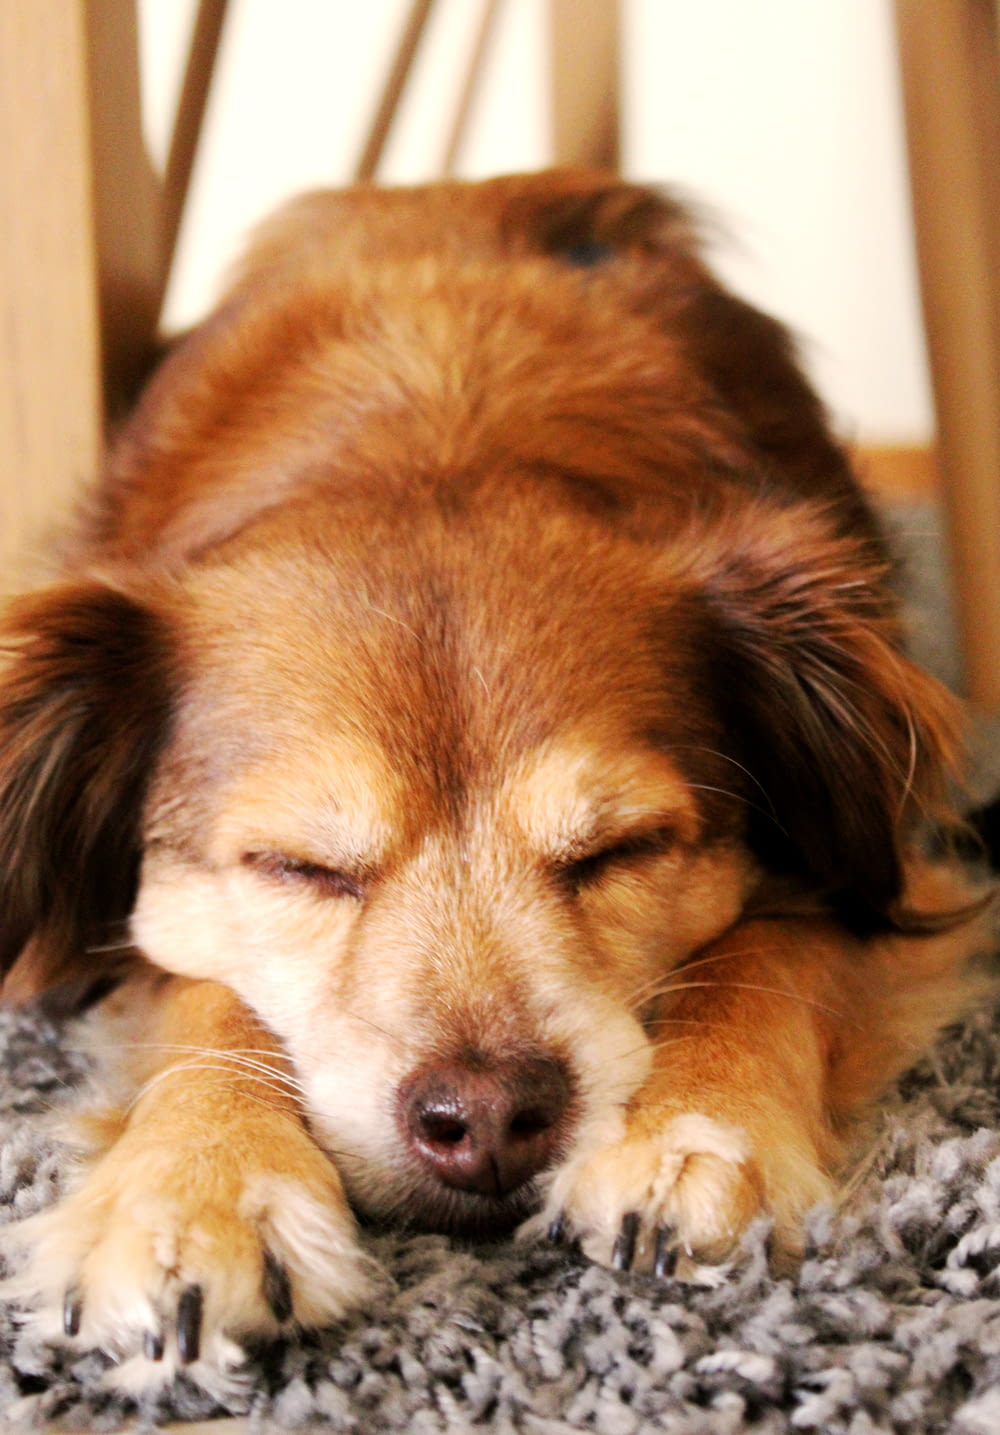 short-coated brown dog sleeping under a wooden chair